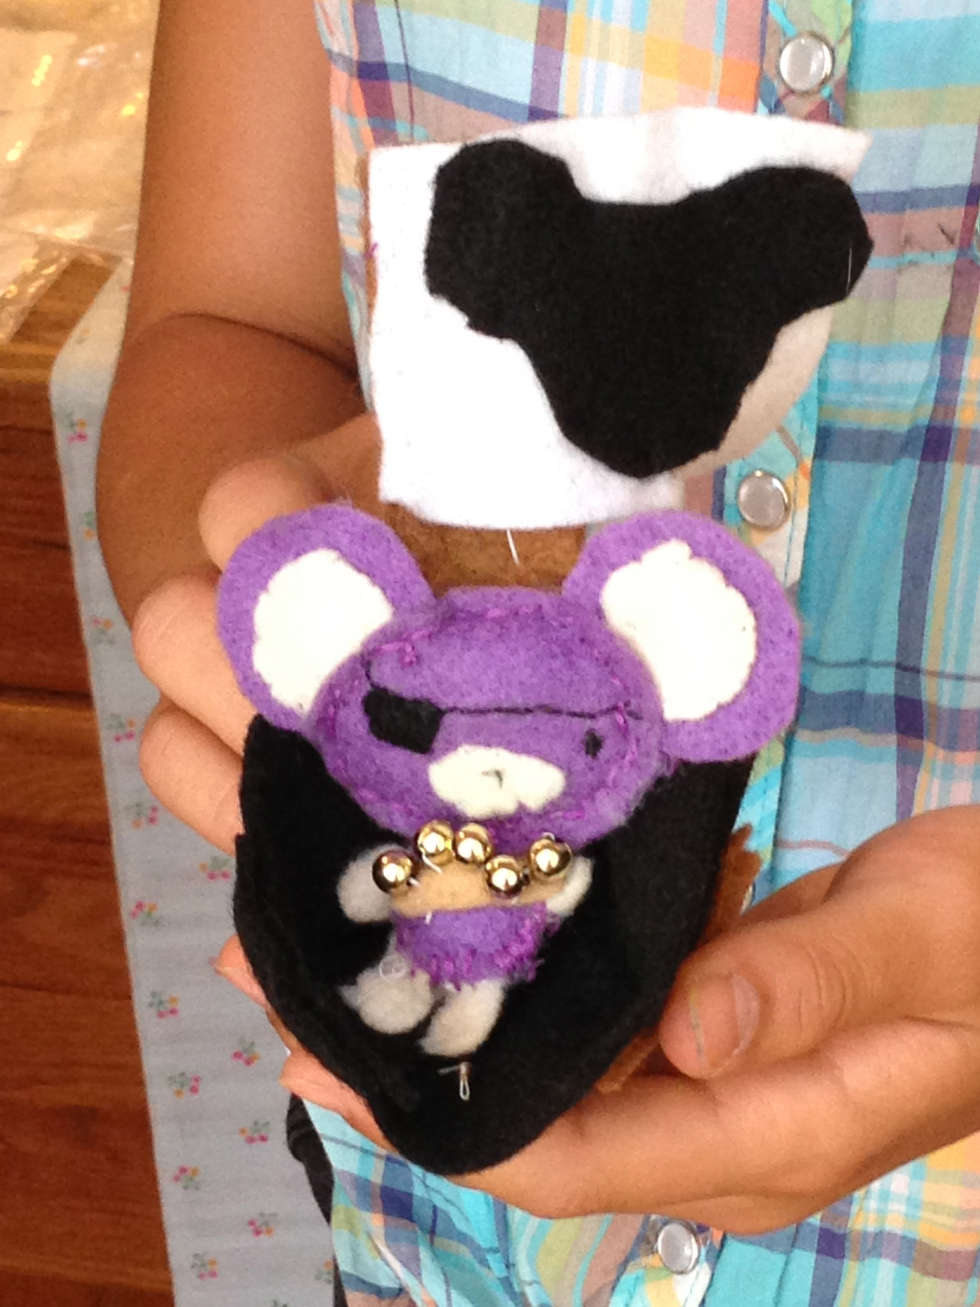   5th grader tiny pirate mouse needs a pirate ship! 